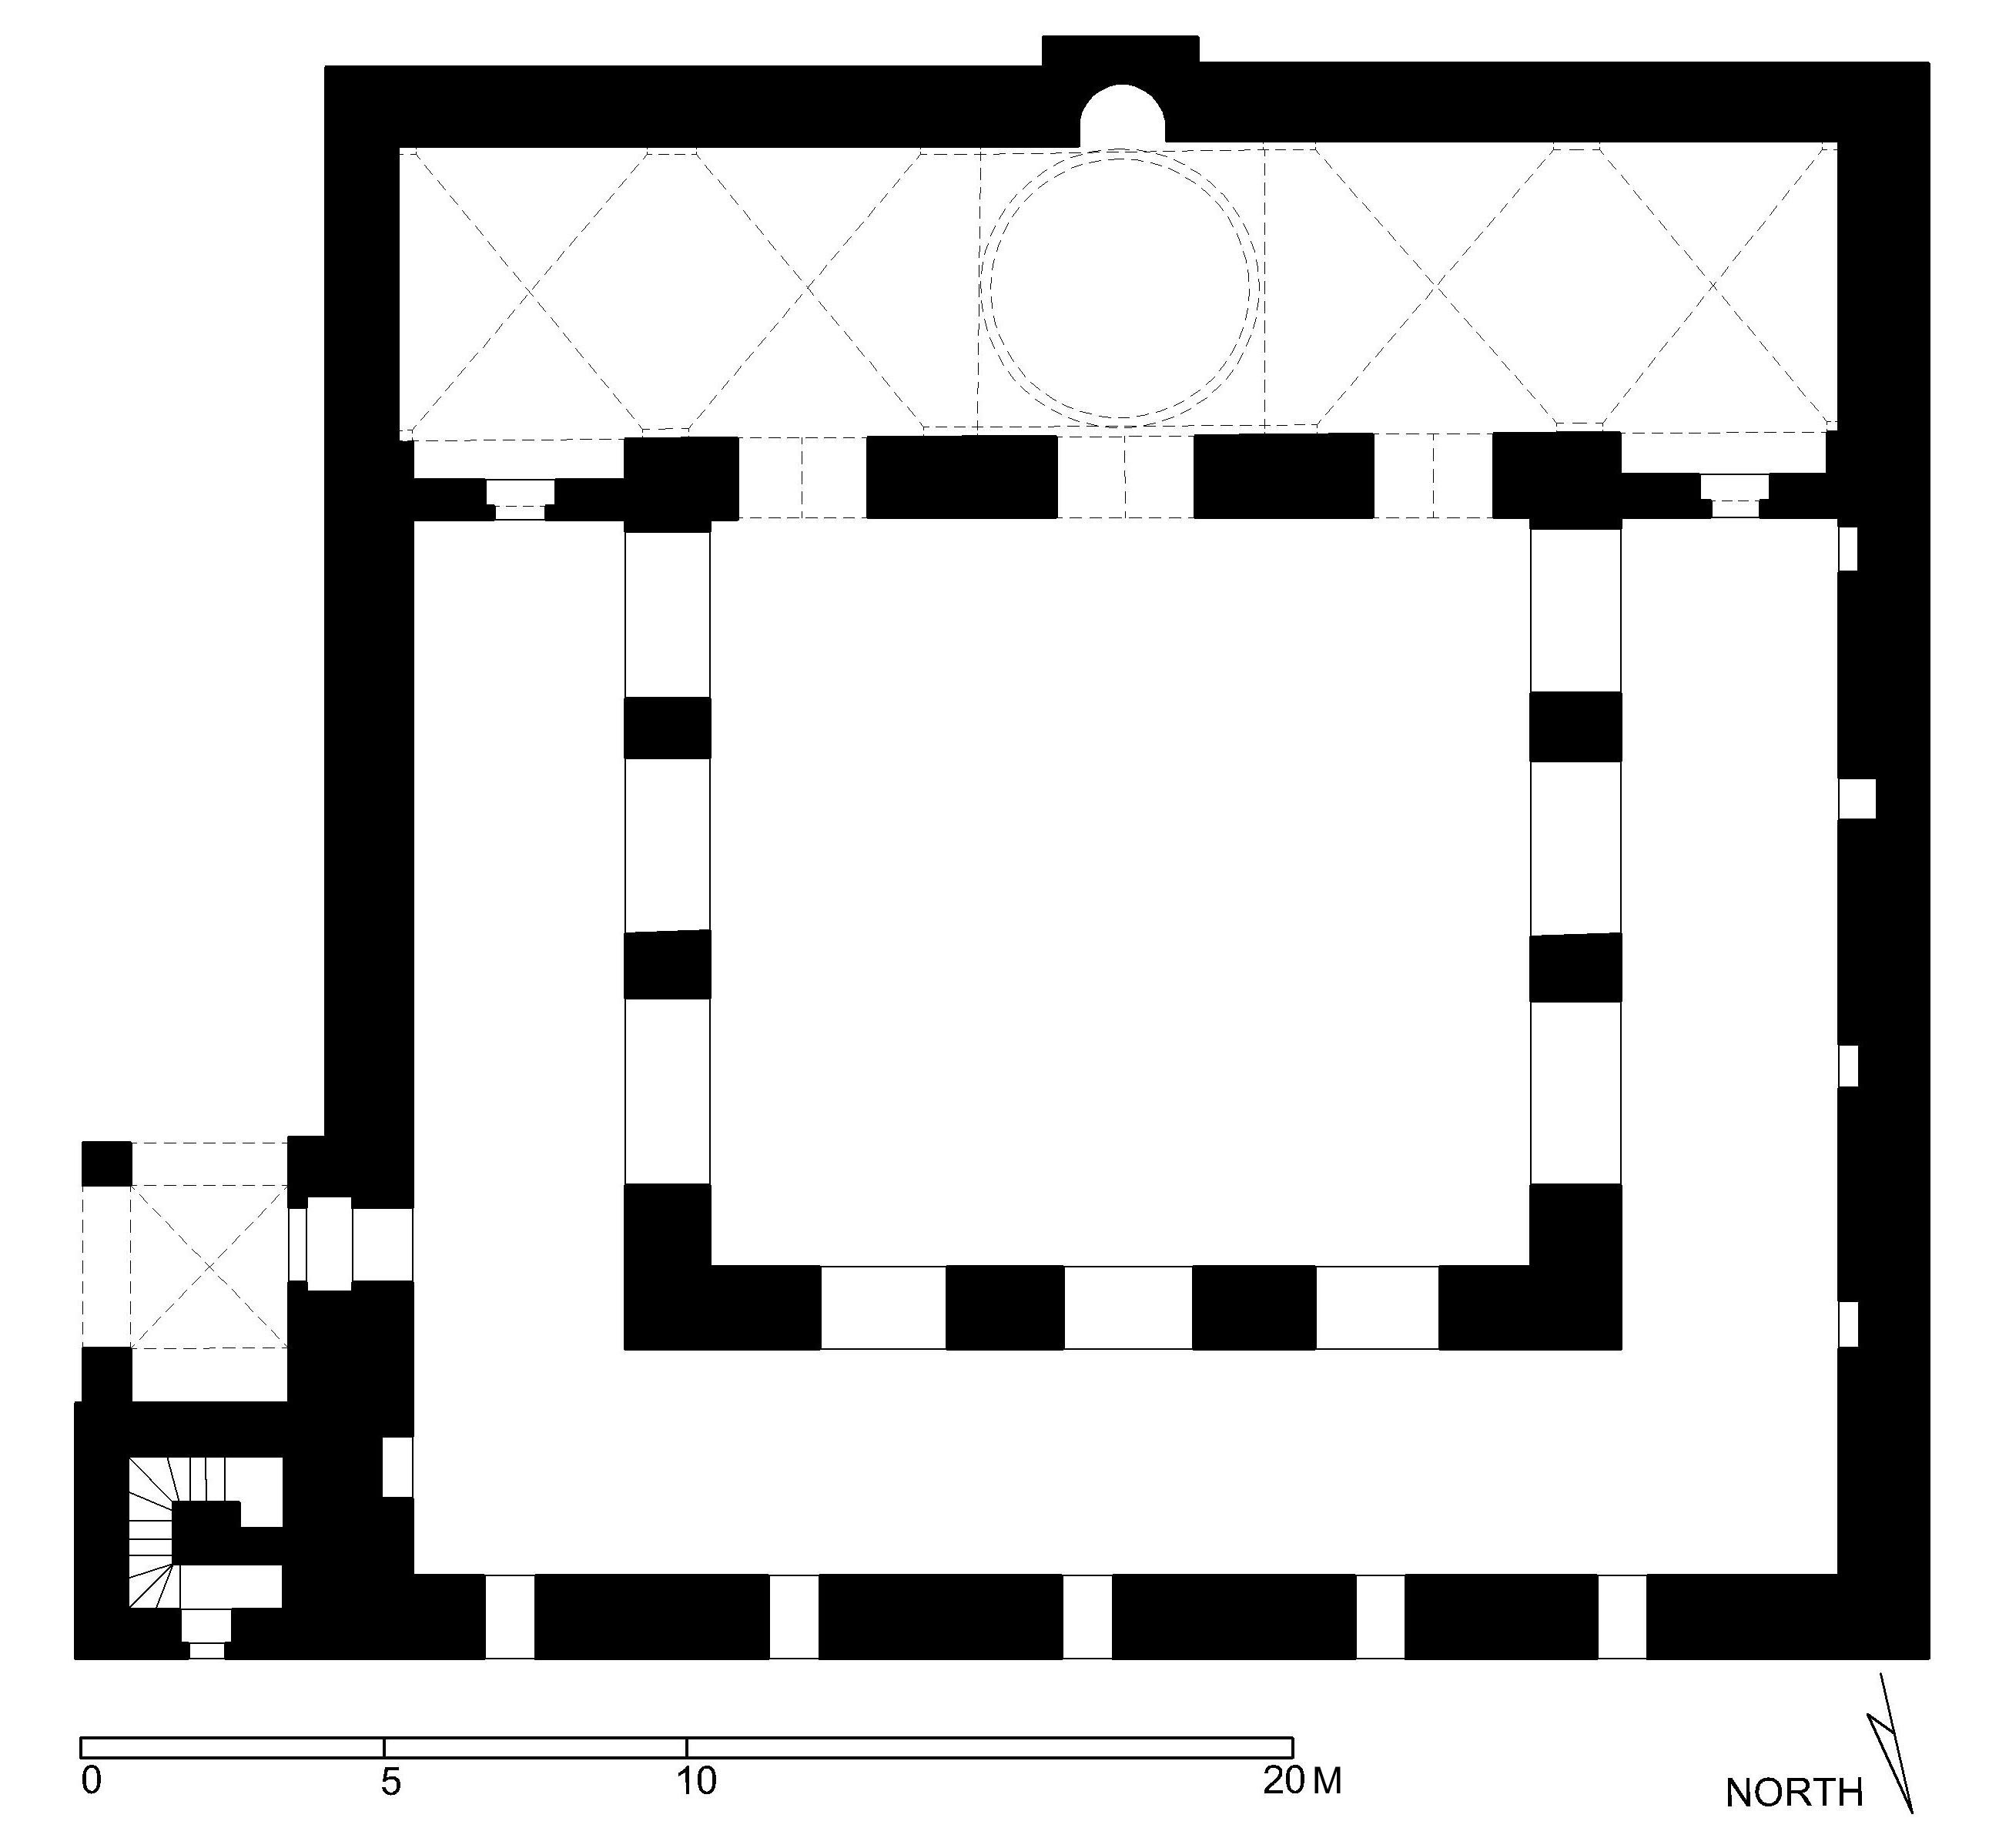 Jami' al-Kabir (Aleppo Citadel) - Floor plan of mosque with minaret (after Meinecke) in AutoCAD 2000 format. Click the download button to download a zipped file containing the .dwg file. 